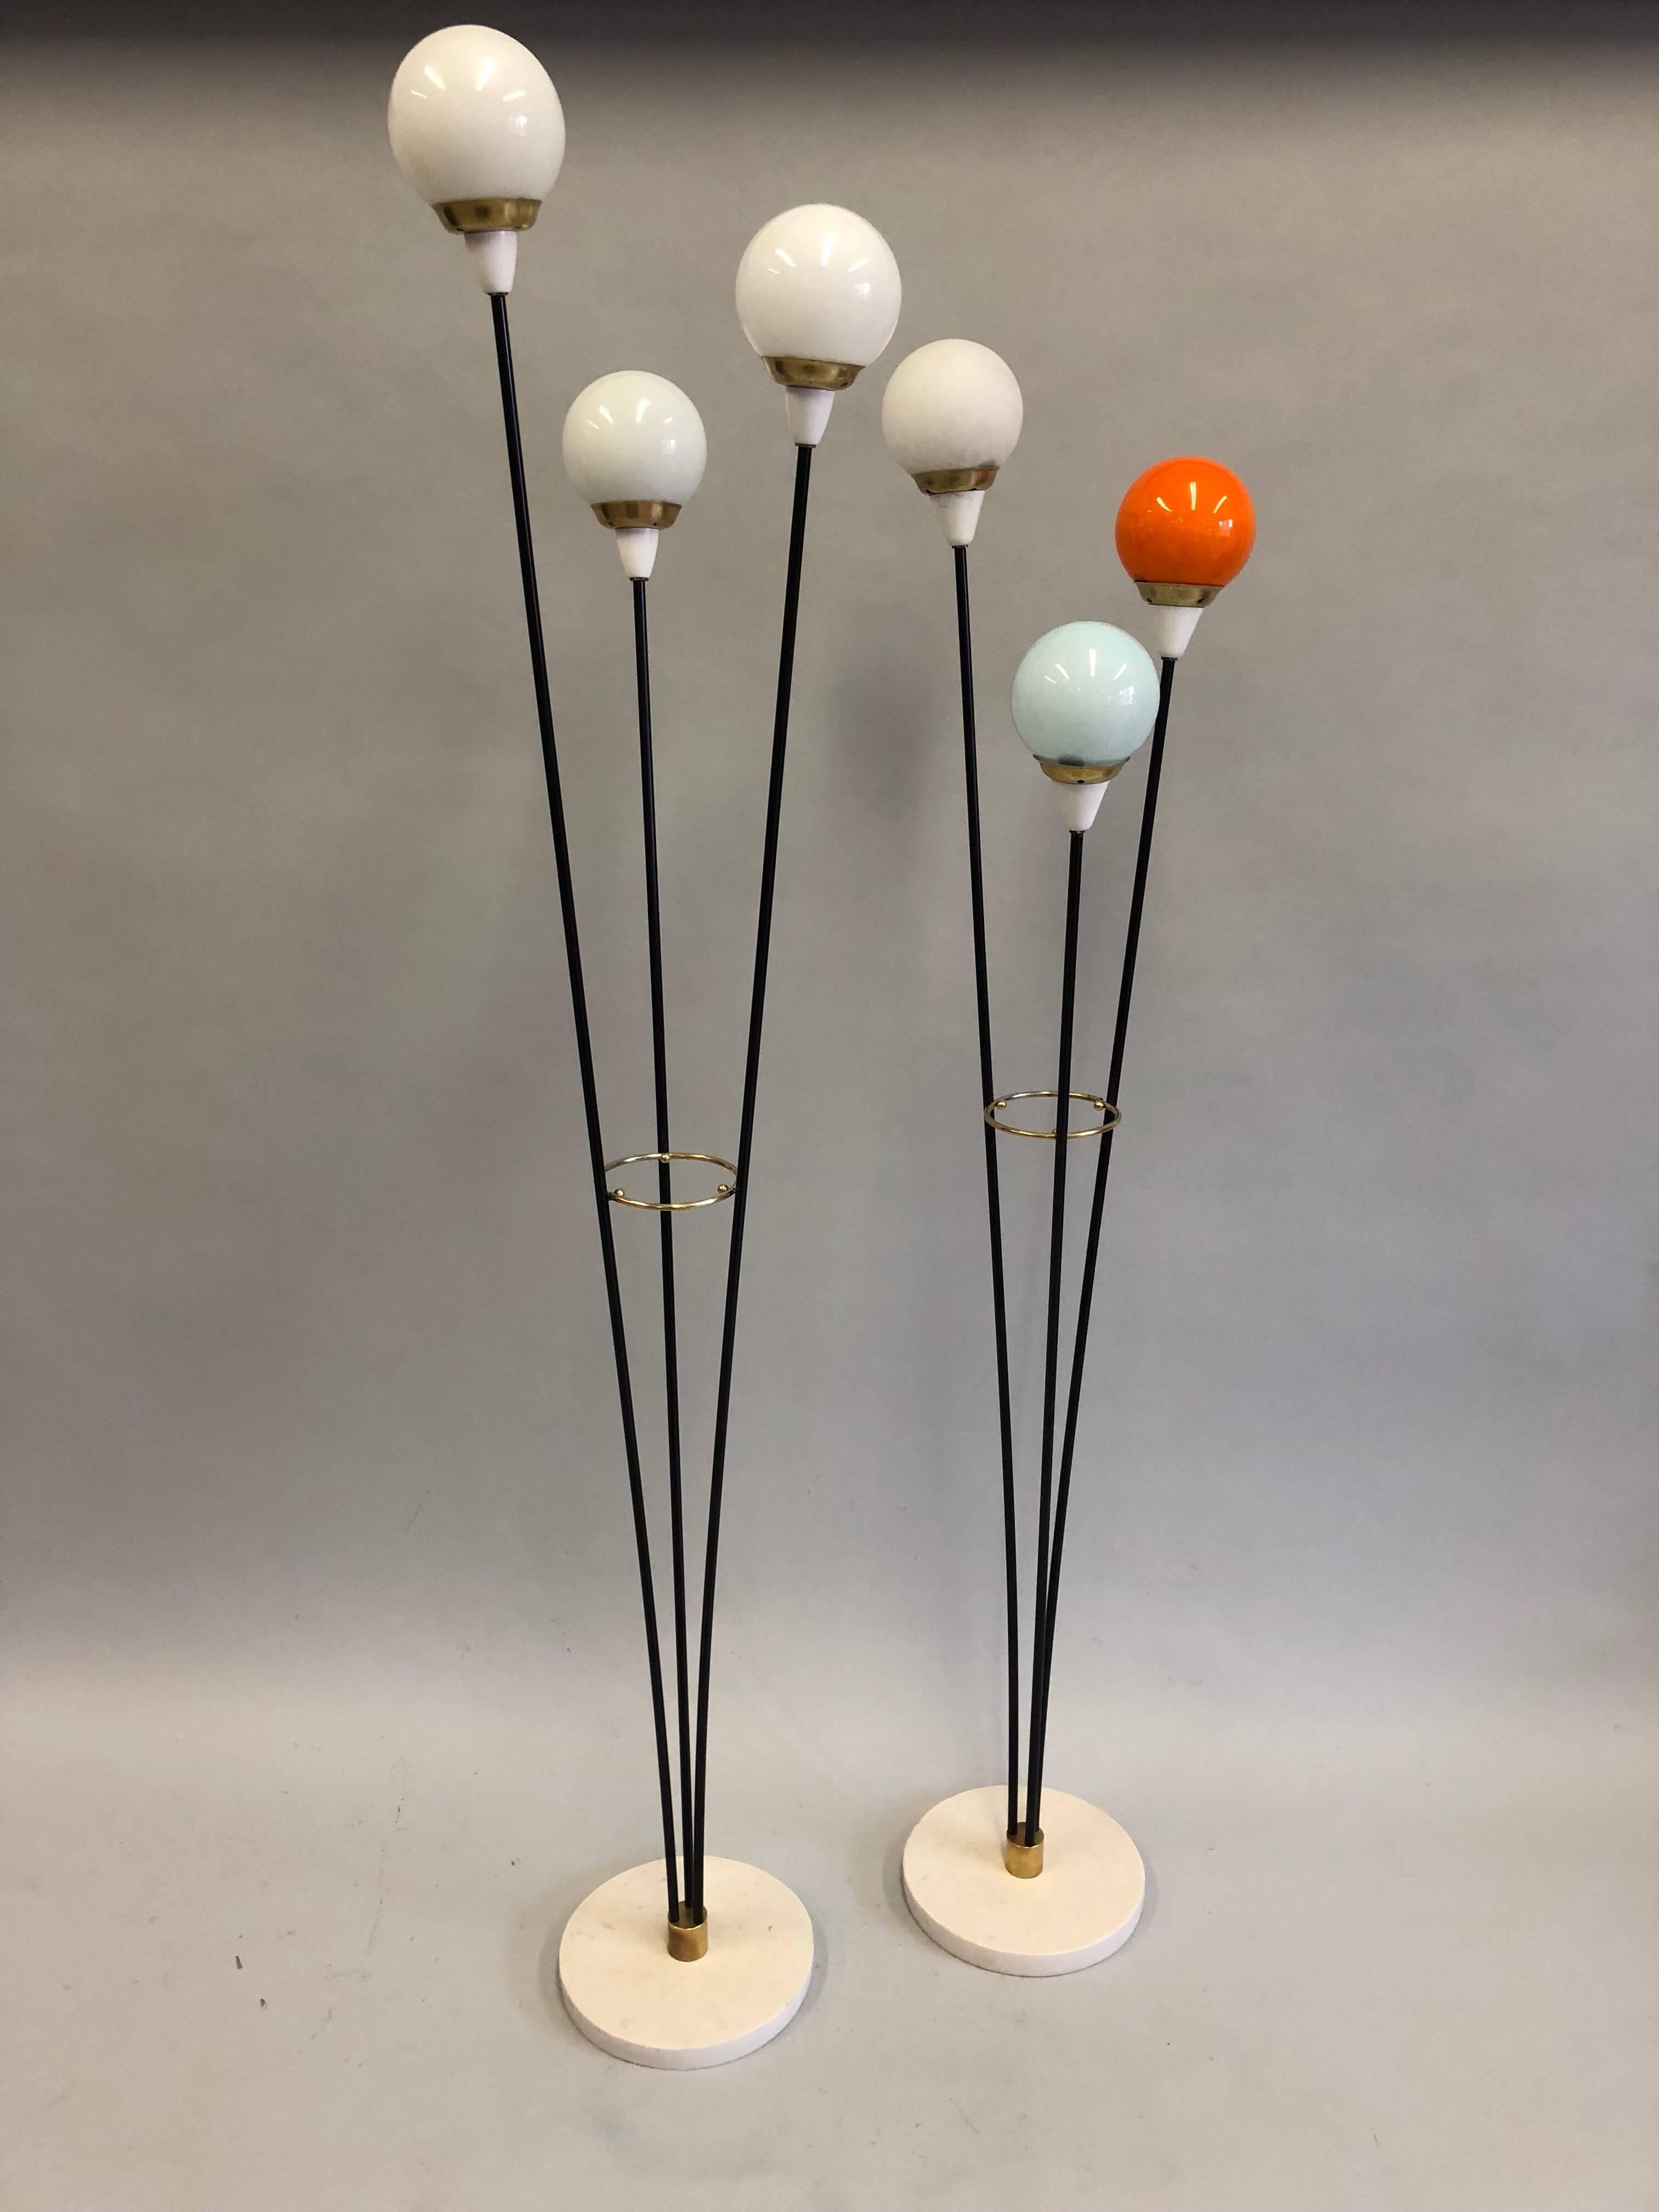 A Rare and Complimentary pair of Italian Mid-Century Modern floor lamps titled 